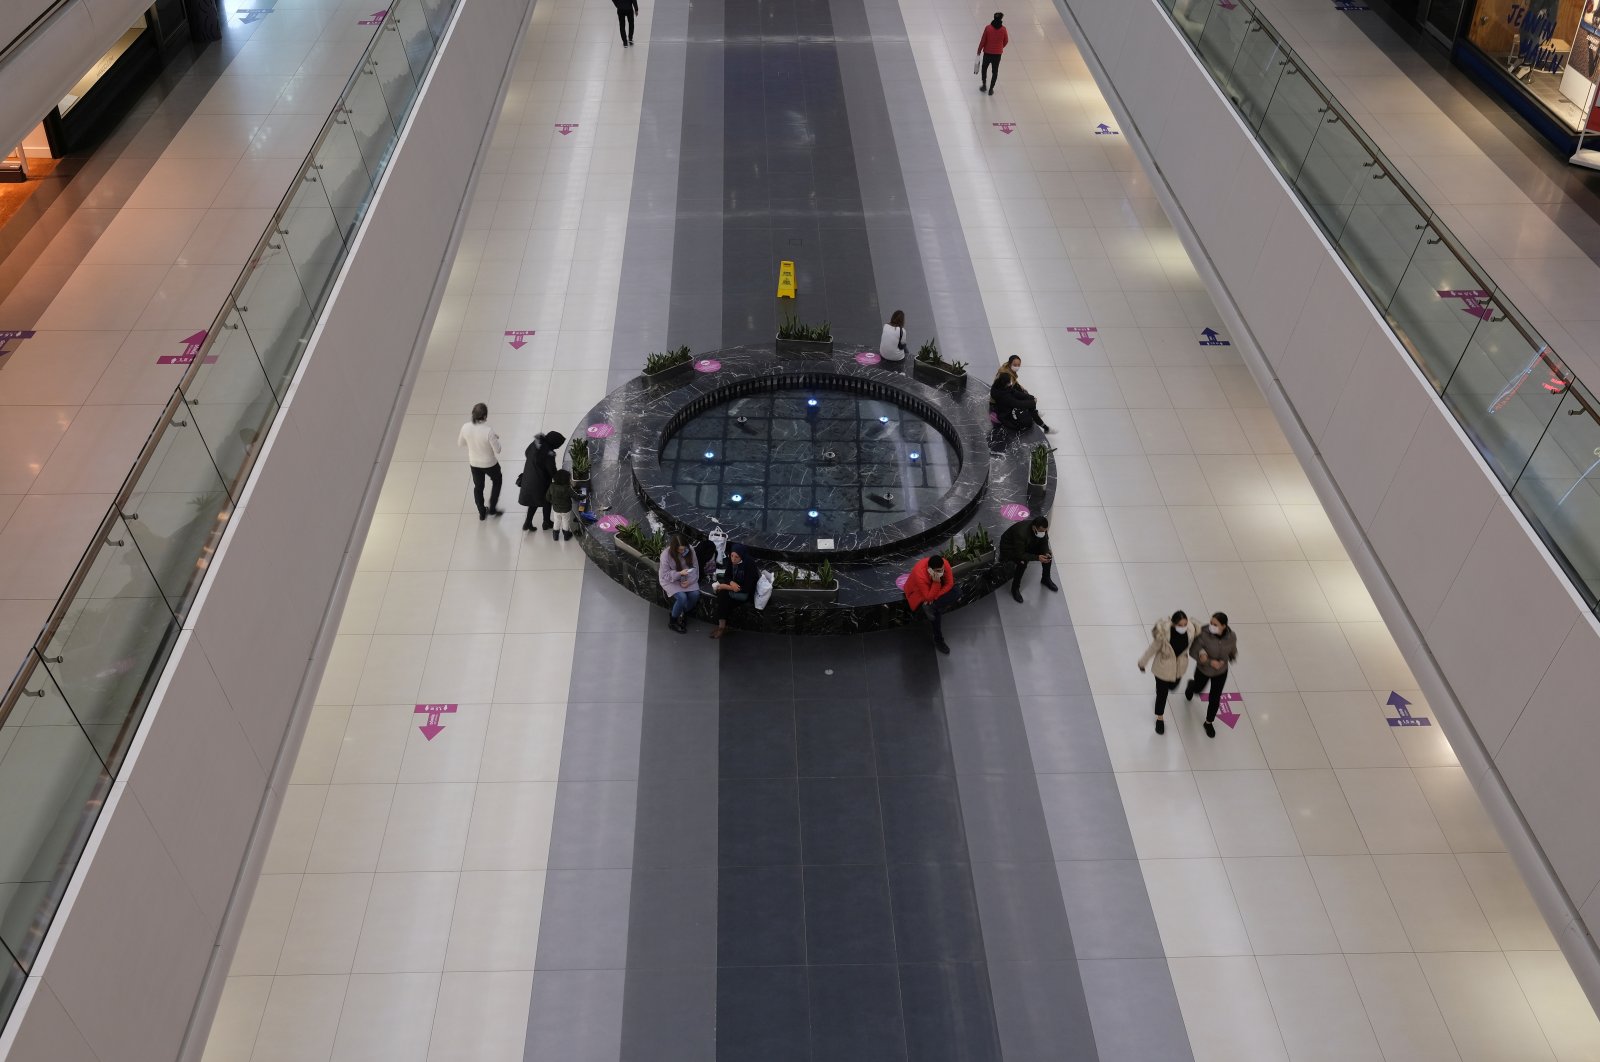 Visitors are seen on the floor at a shopping mall, in Istanbul, Türkiye, Dec. 2, 2020. (Reuters Photo)